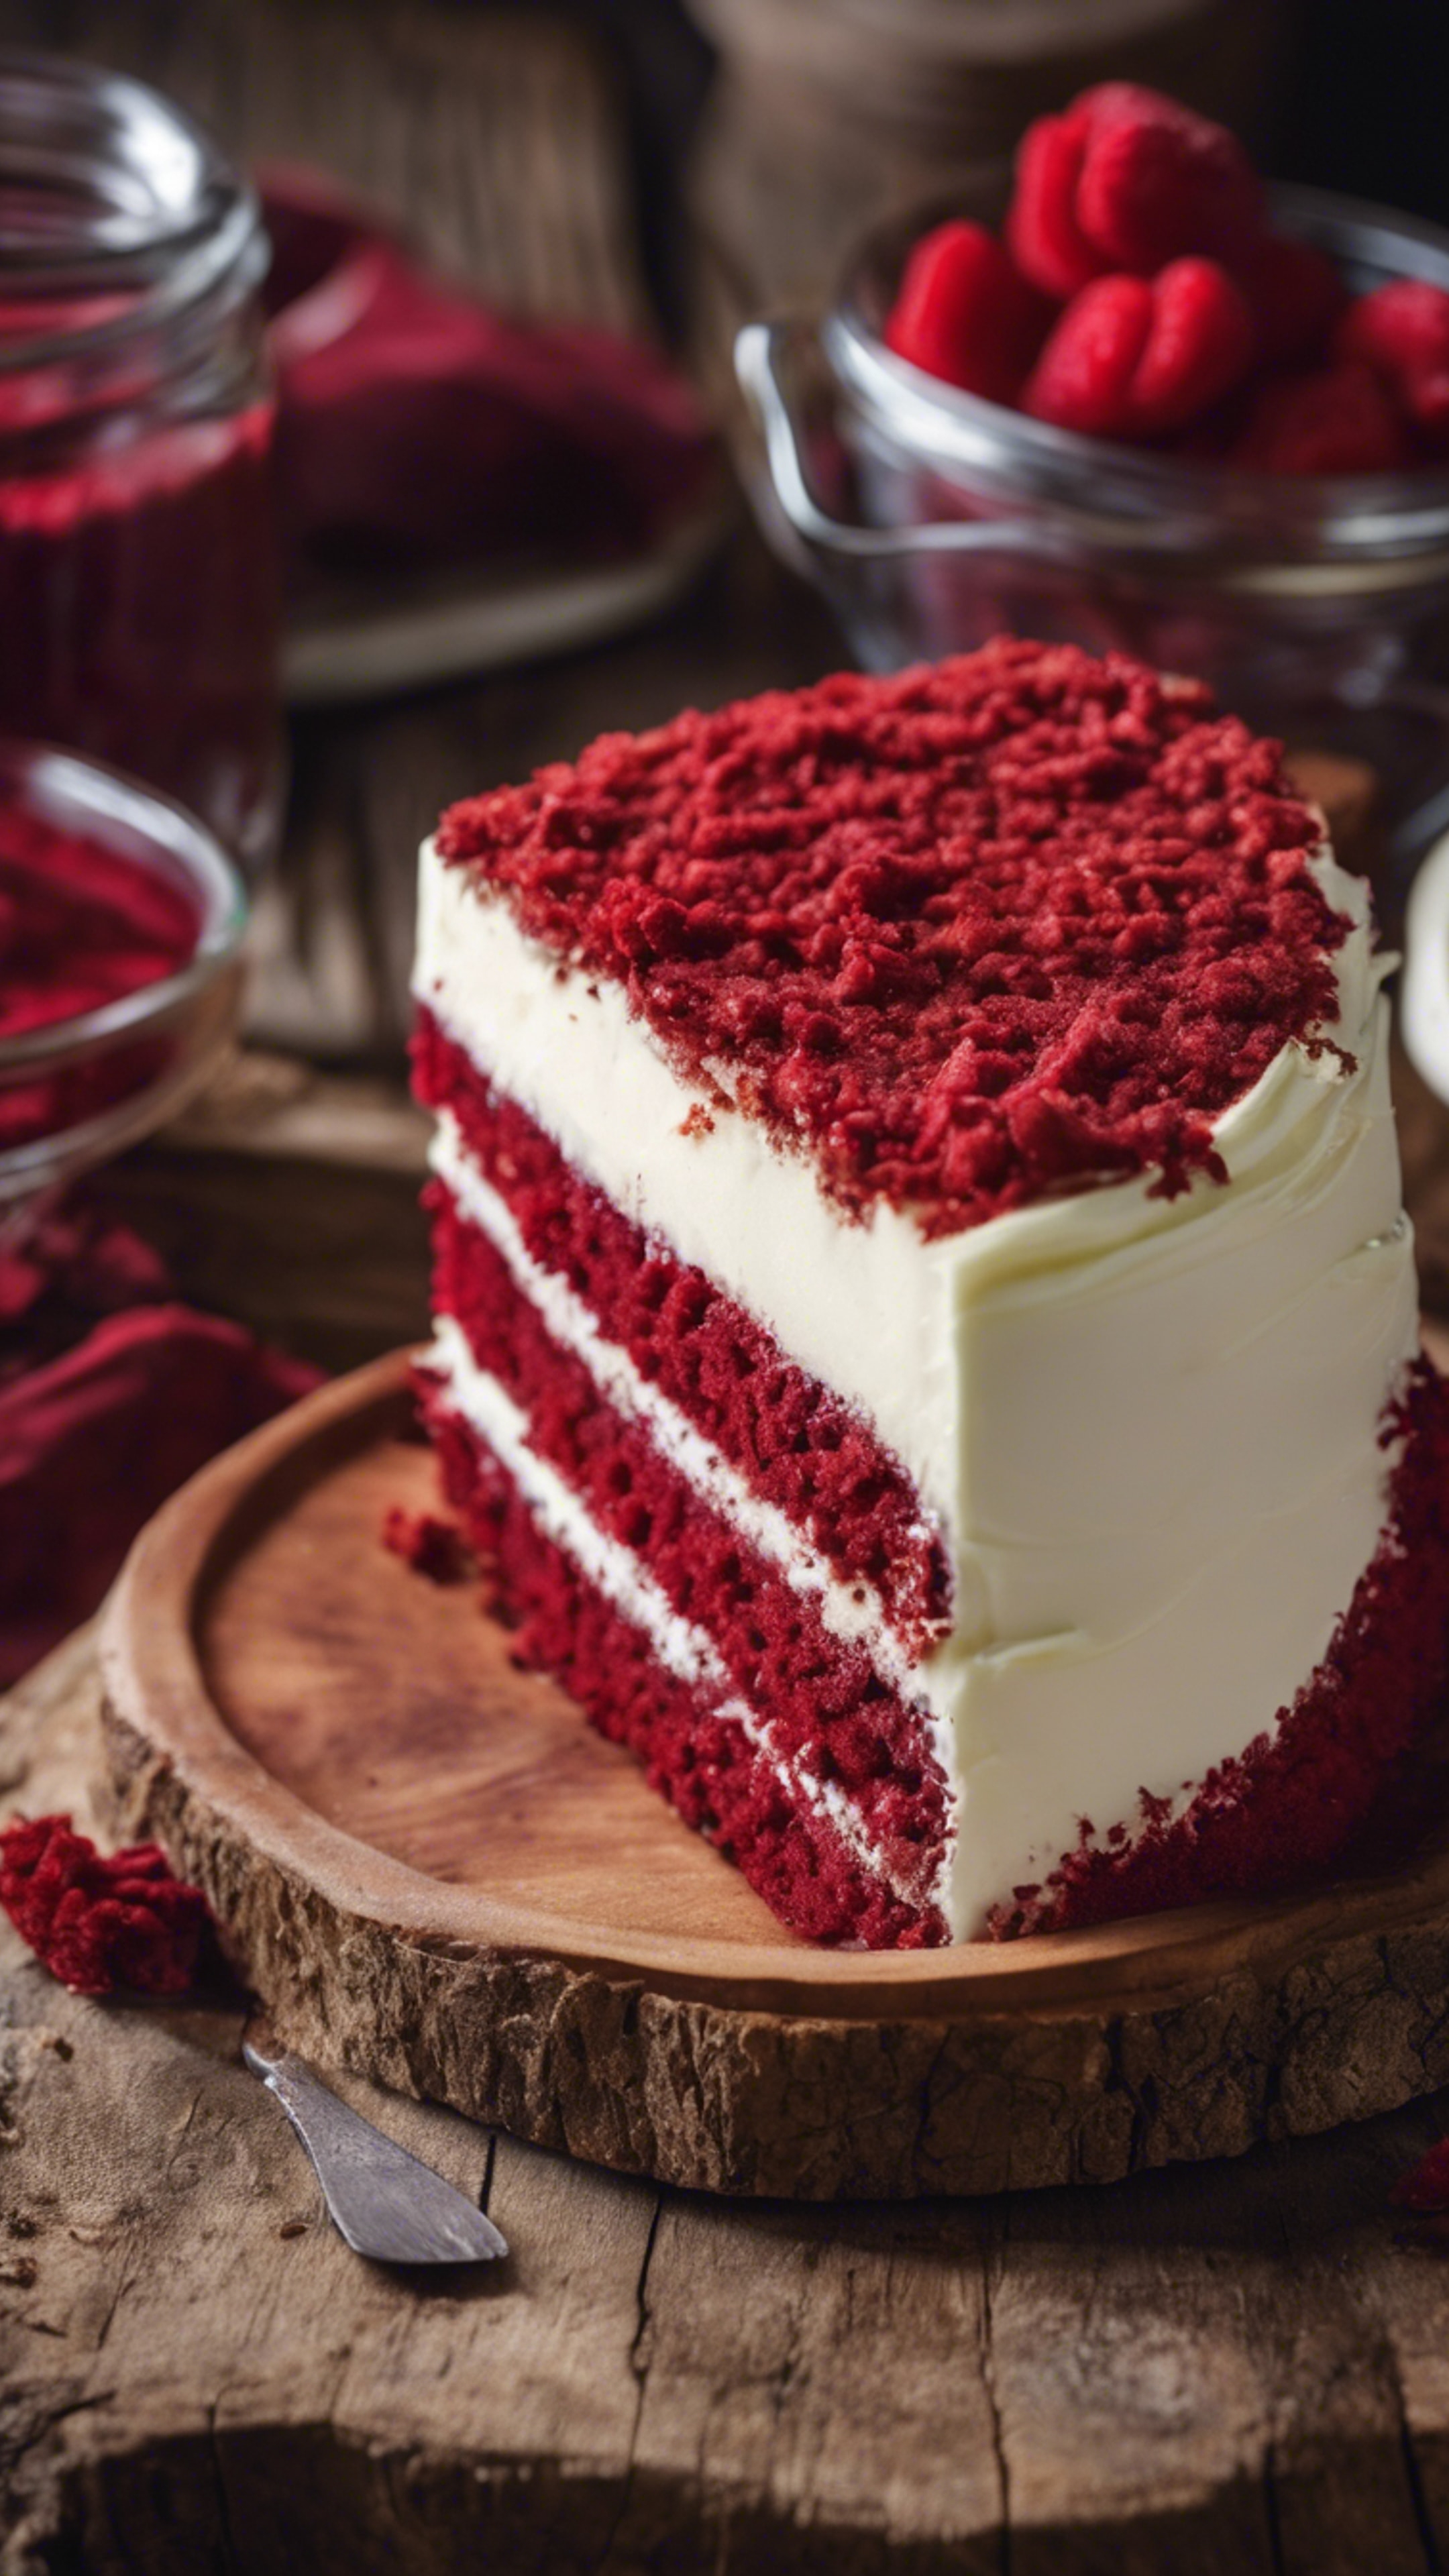 A slice of rich red velvet cake with a layer of cream cheese frosting, placed on a rustic wooden table. Behang[5b147ad1f433484e86de]